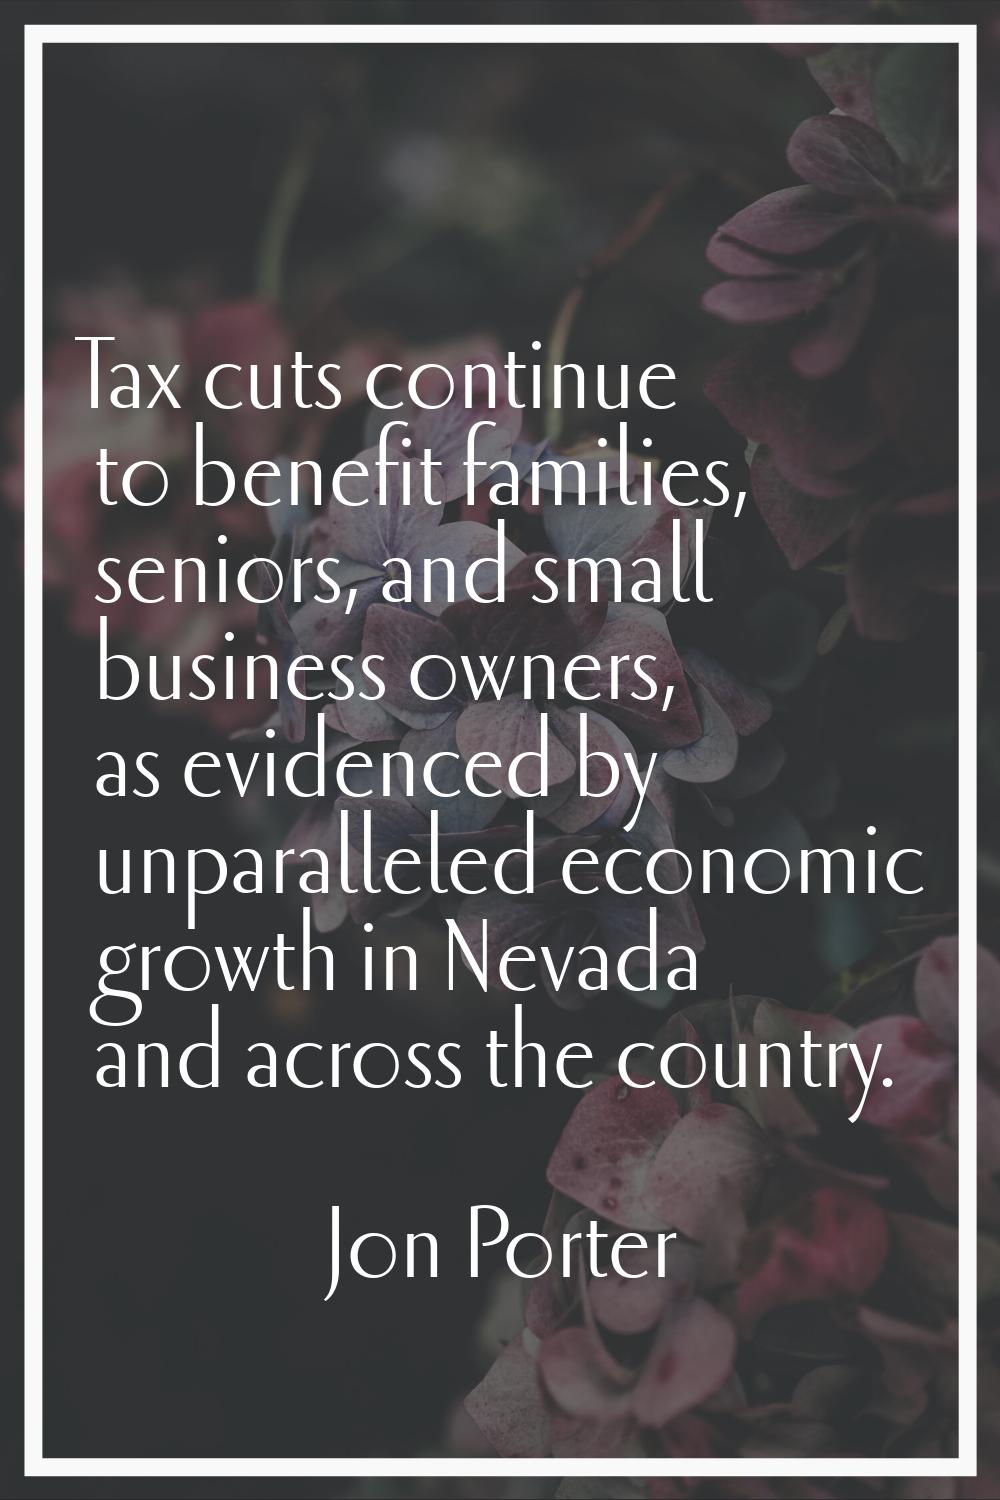 Tax cuts continue to benefit families, seniors, and small business owners, as evidenced by unparall